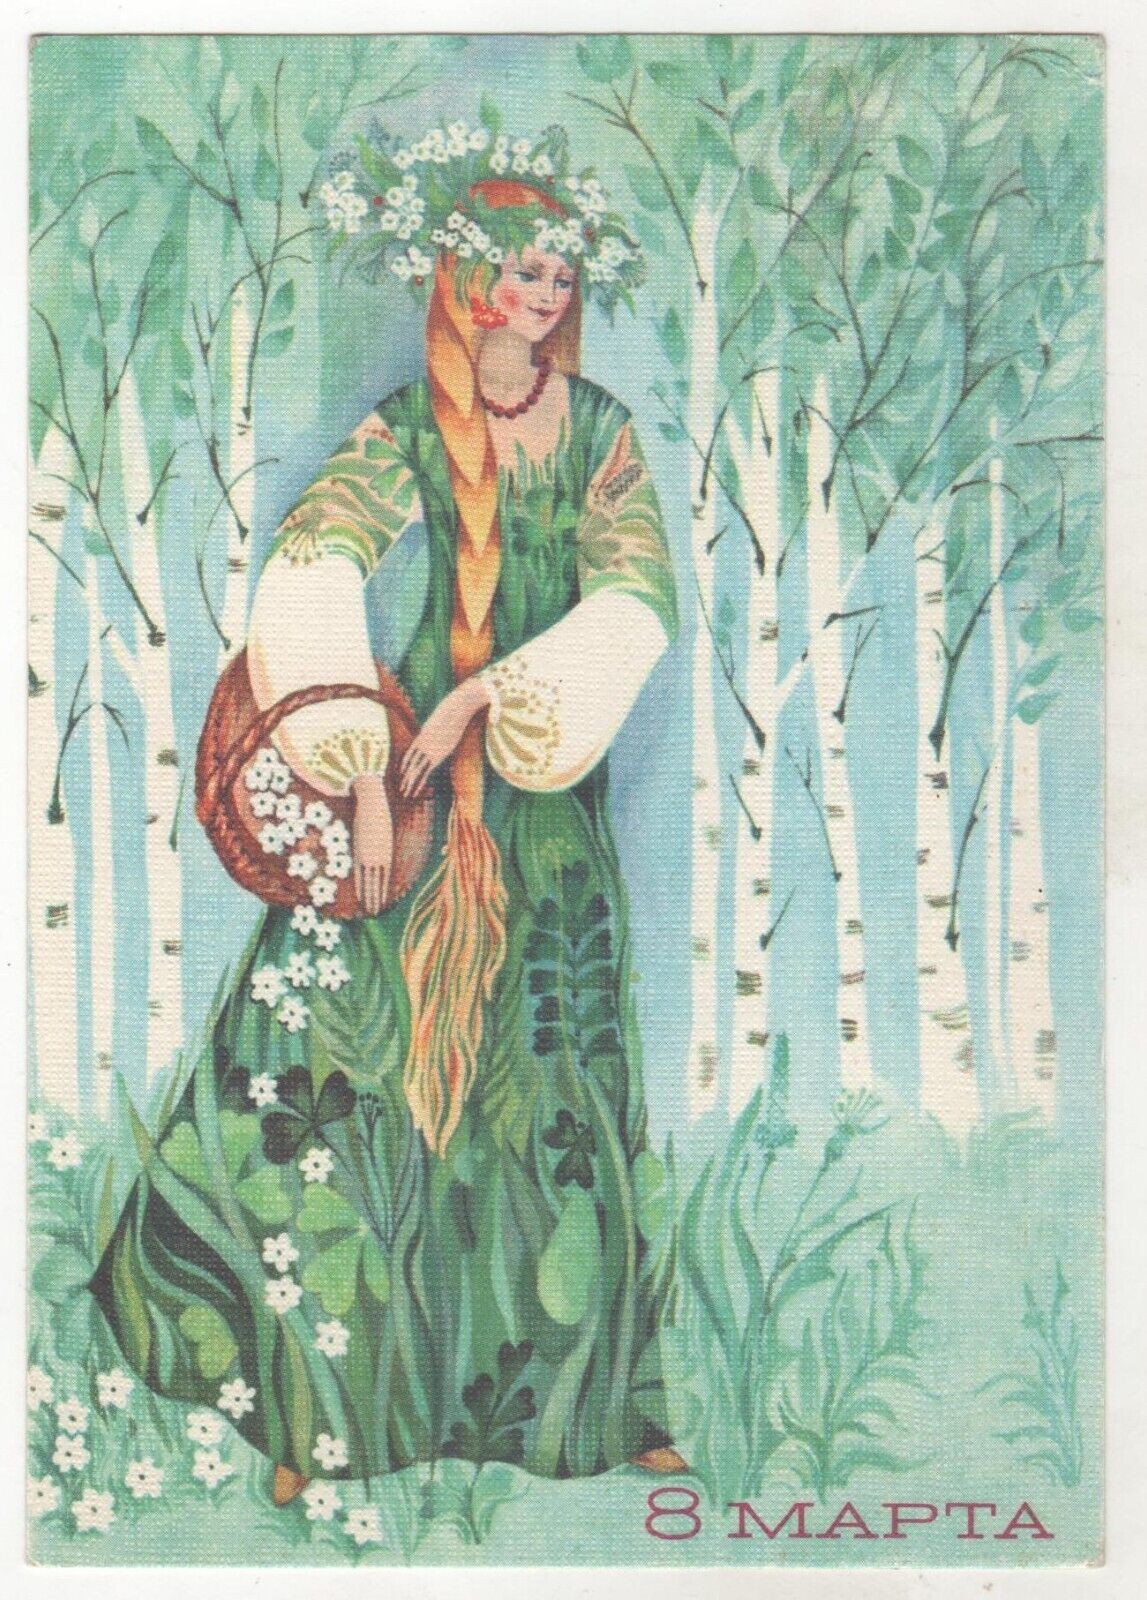 1988 March 8 Greeting Women's Day spring flowers GIRL Russian postcard OLD